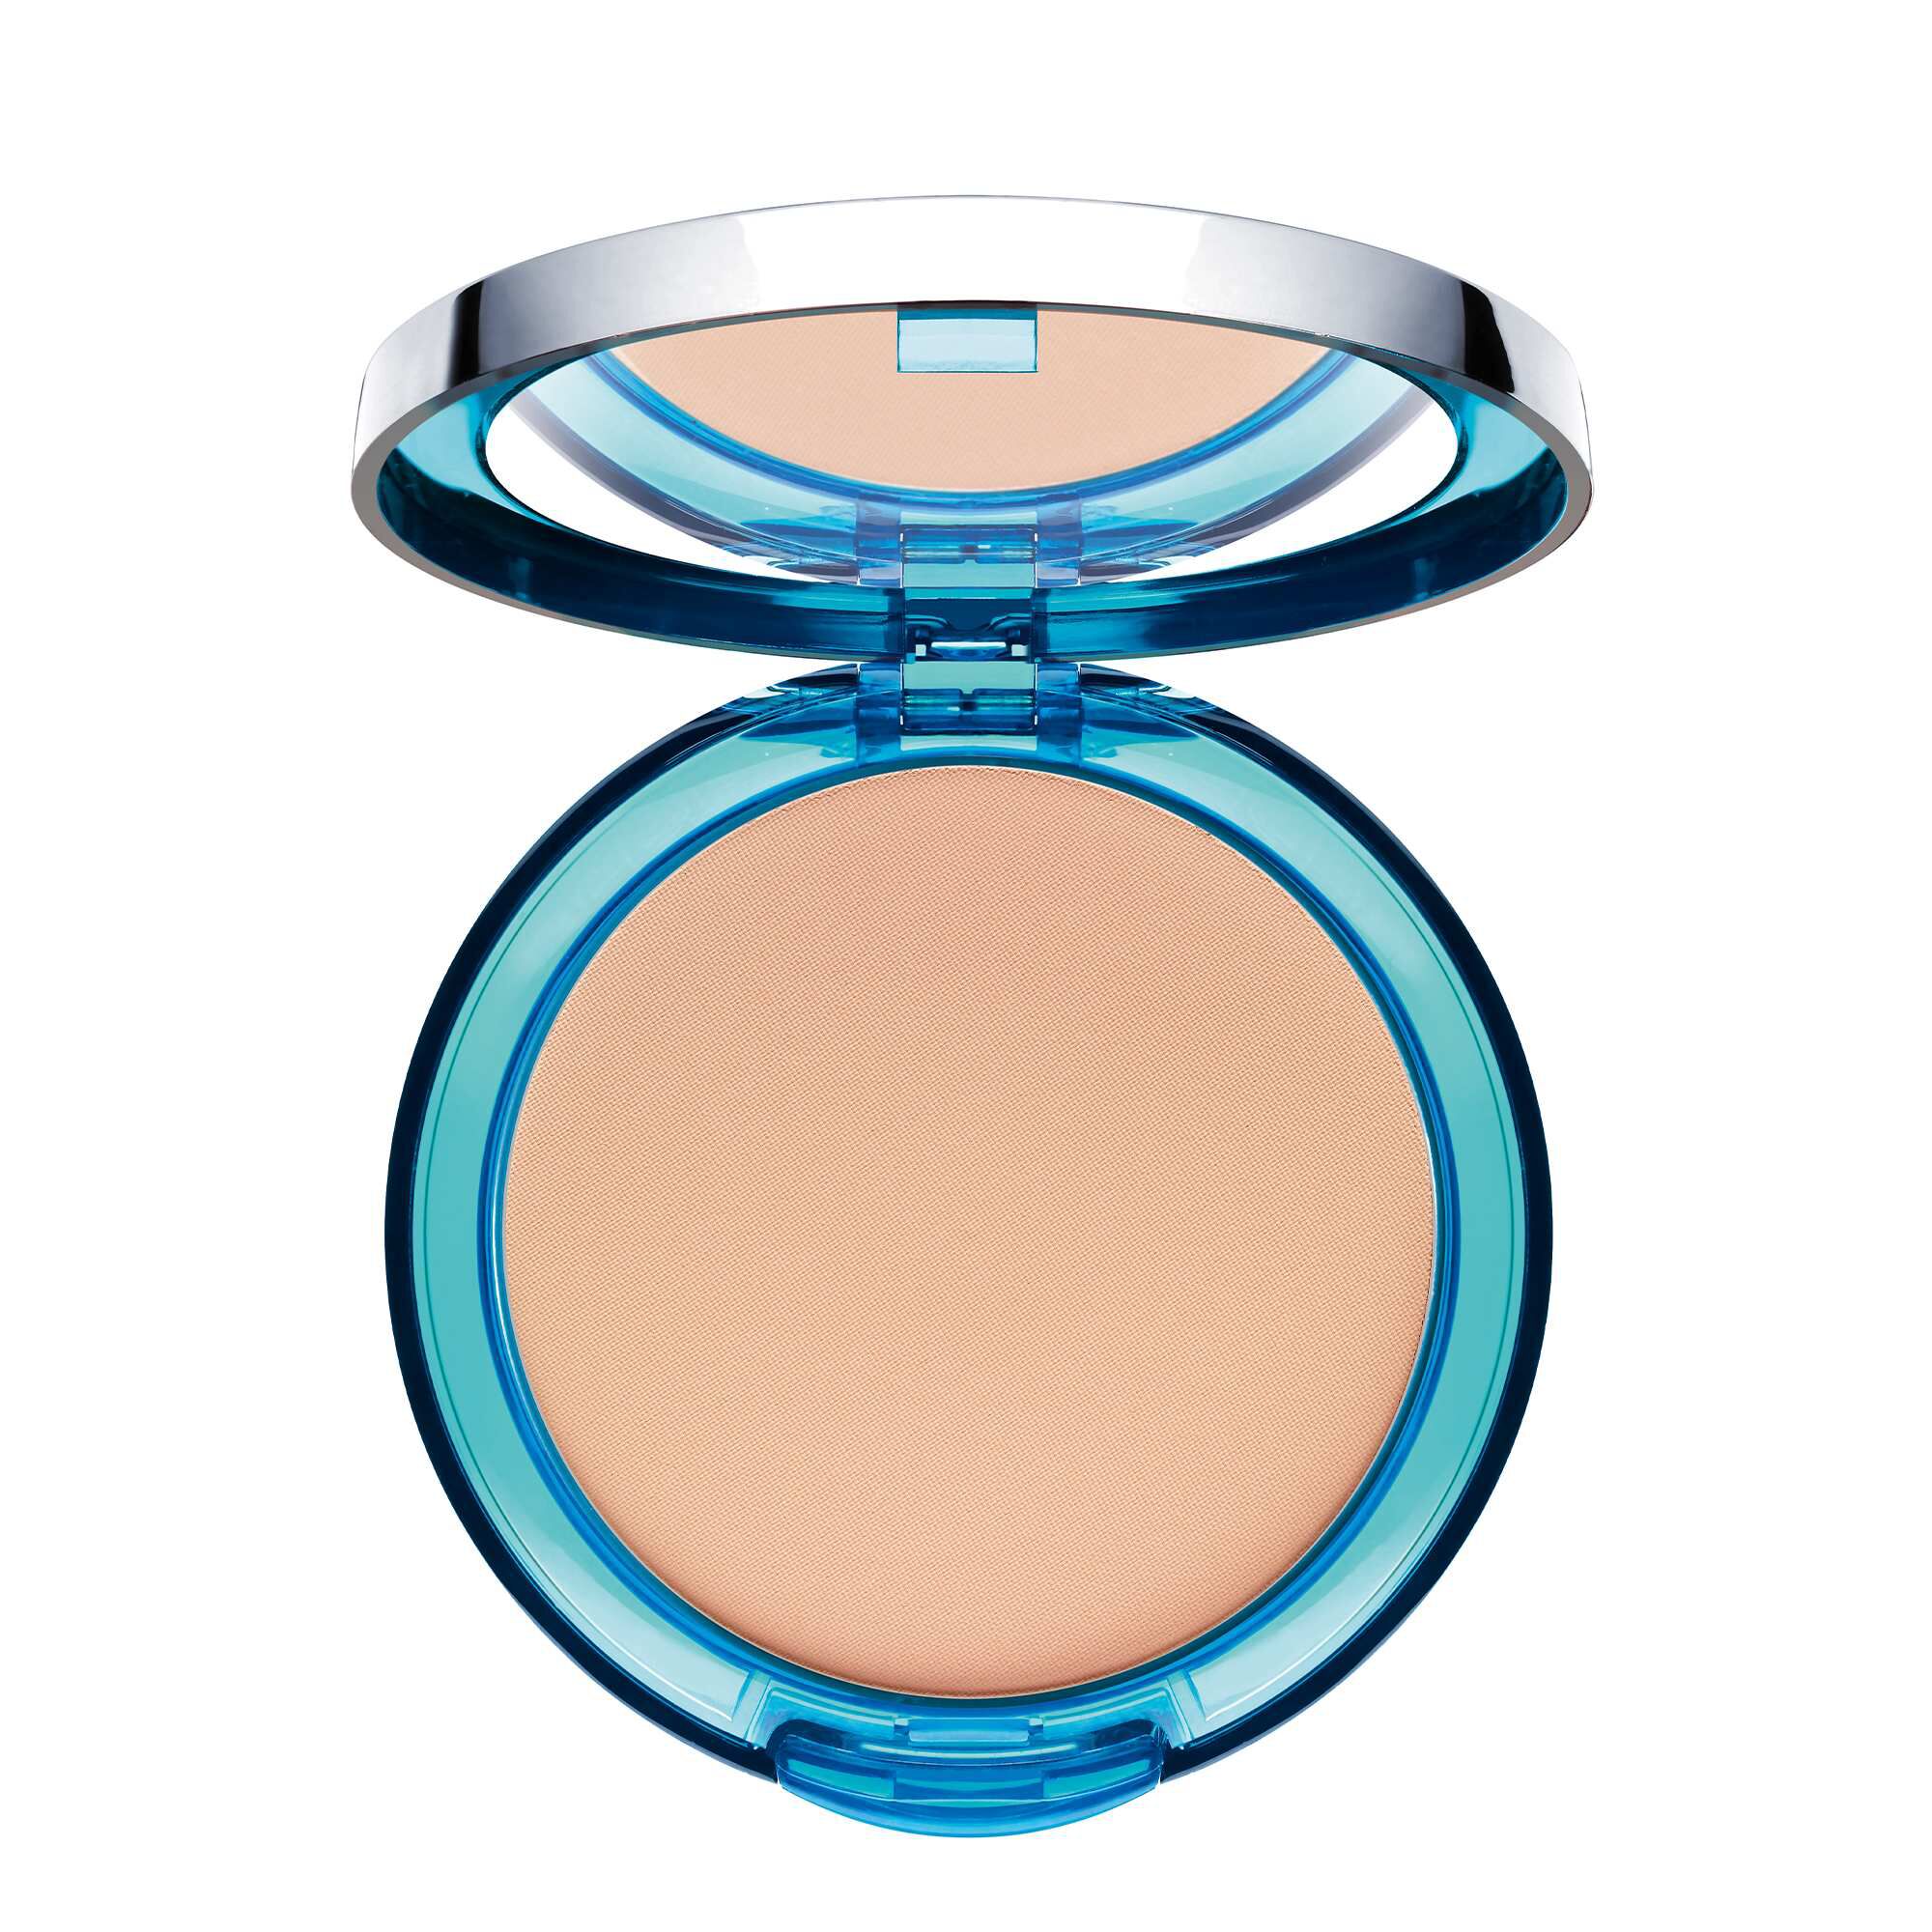 SUN PROTECTION POWDER FOUNDATION SPF 50 WET & DRY - cool bei